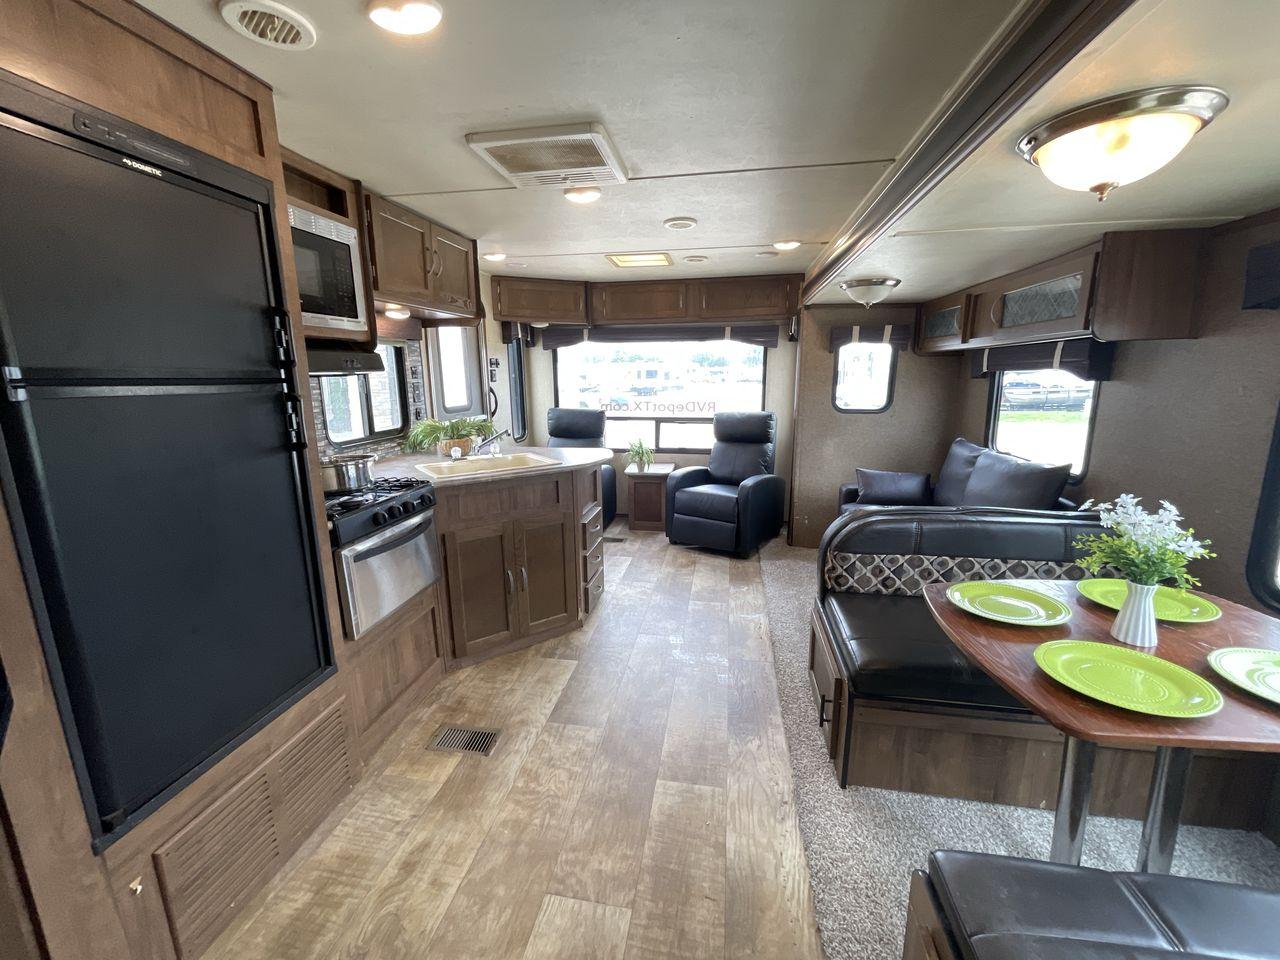 2018 GULFSTREAM TRAILMASTER 262RLS (1NL1GTP2XJ1) , Length: 31.25 ft. | Dry Weight: 6,849 lbs. | Slides: 1 transmission, located at 4319 N Main St, Cleburne, TX, 76033, (817) 678-5133, 32.385960, -97.391212 - This 2018 Gulf Stream Trailmaster 262RLS travel trailer measures just over 31' in length. It is a dual axle, steel wheel setup with a dry weight of 6,849 lbs and a carrying capacity of 1,421 lbs. With a dry weight of 6,849 lbs., the Trailmaster 262RLS offers easy maneuverability without compromising - Photo #11